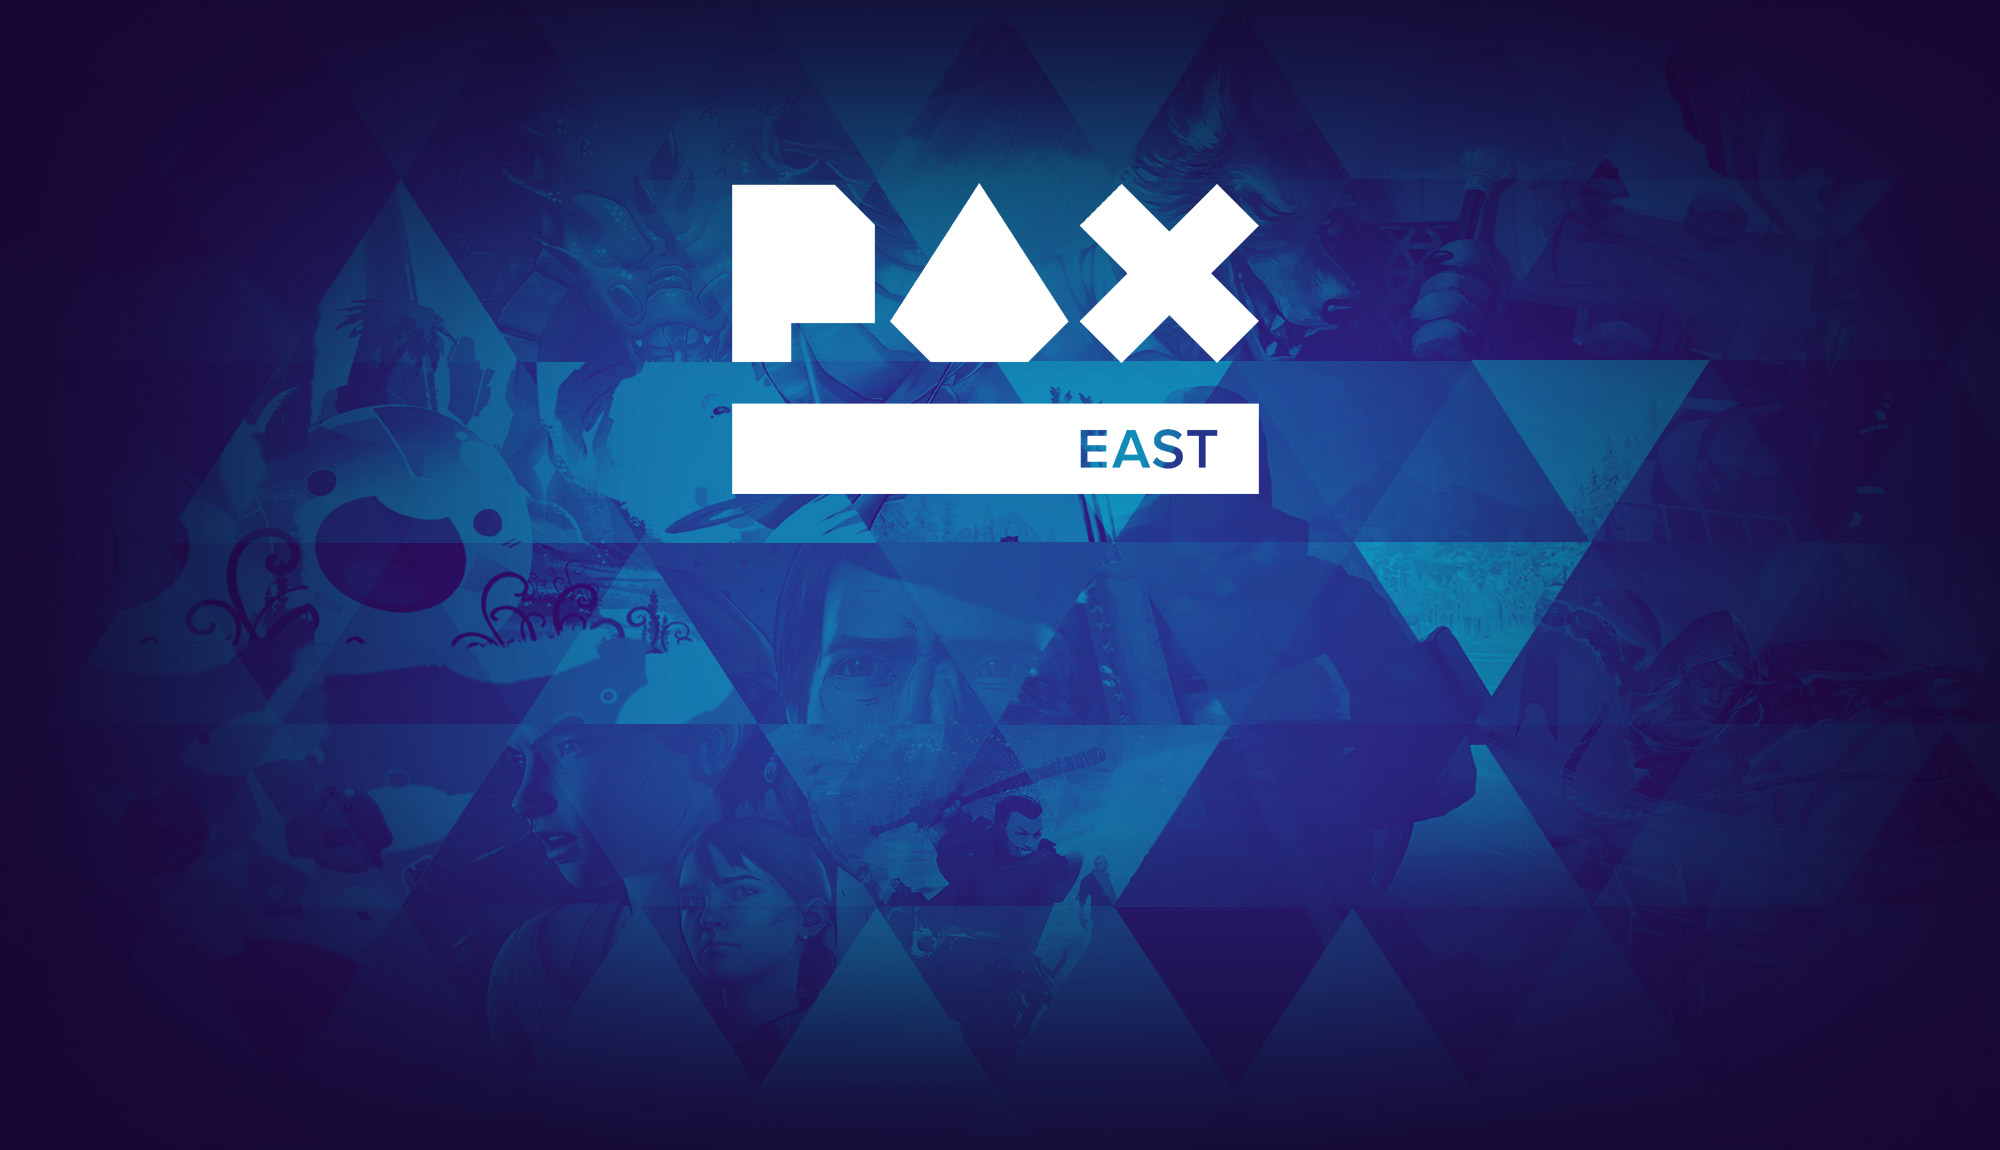 Skybound at PAX East 2019!